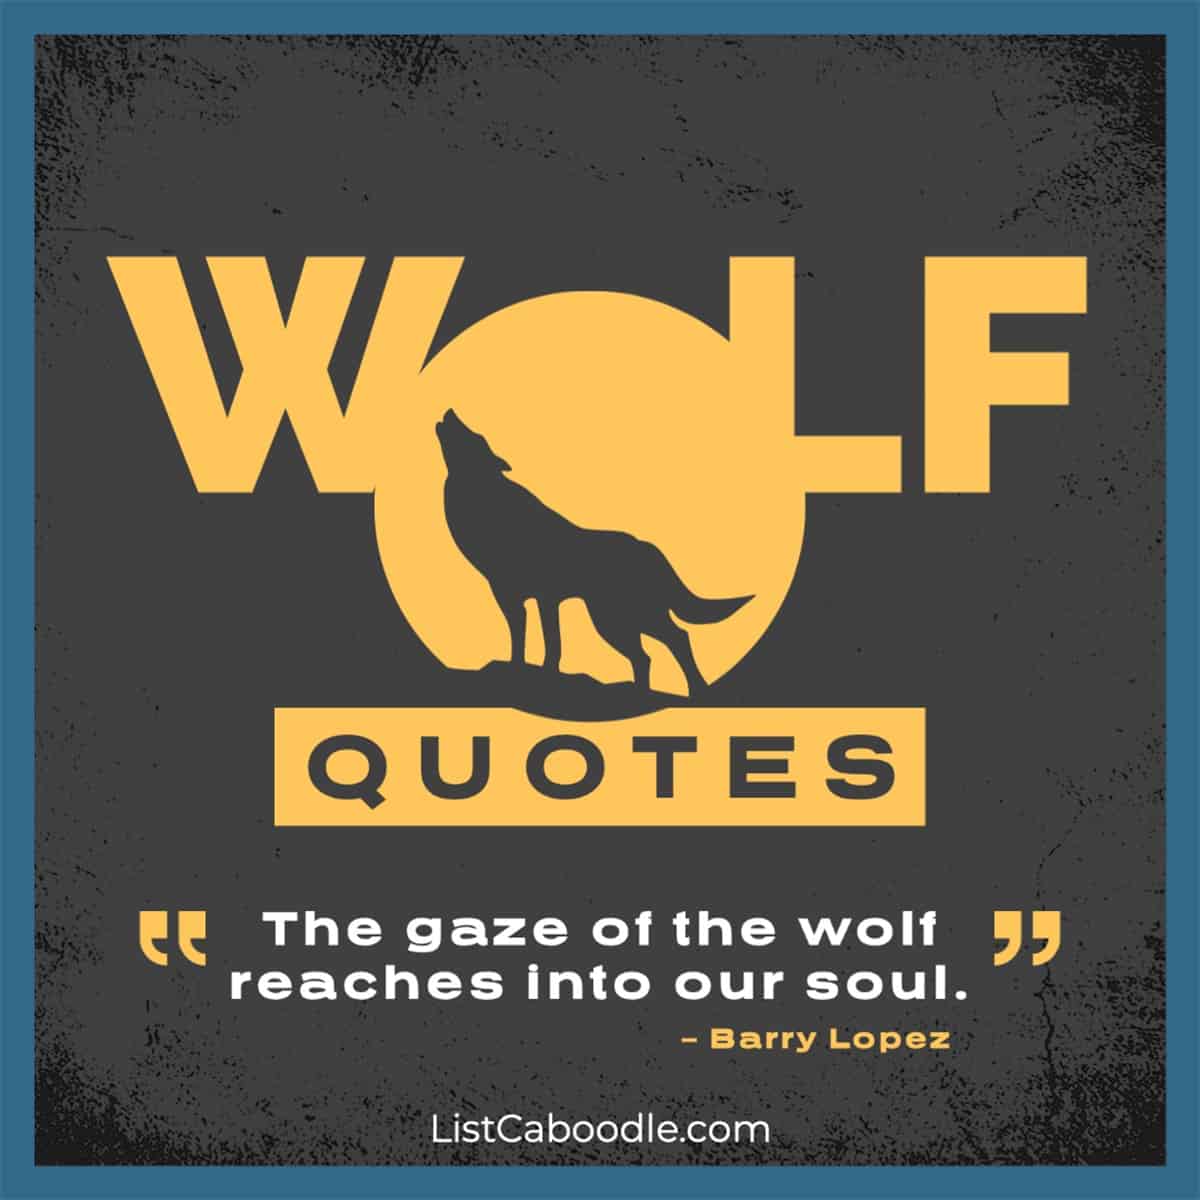 Wolf quotes image